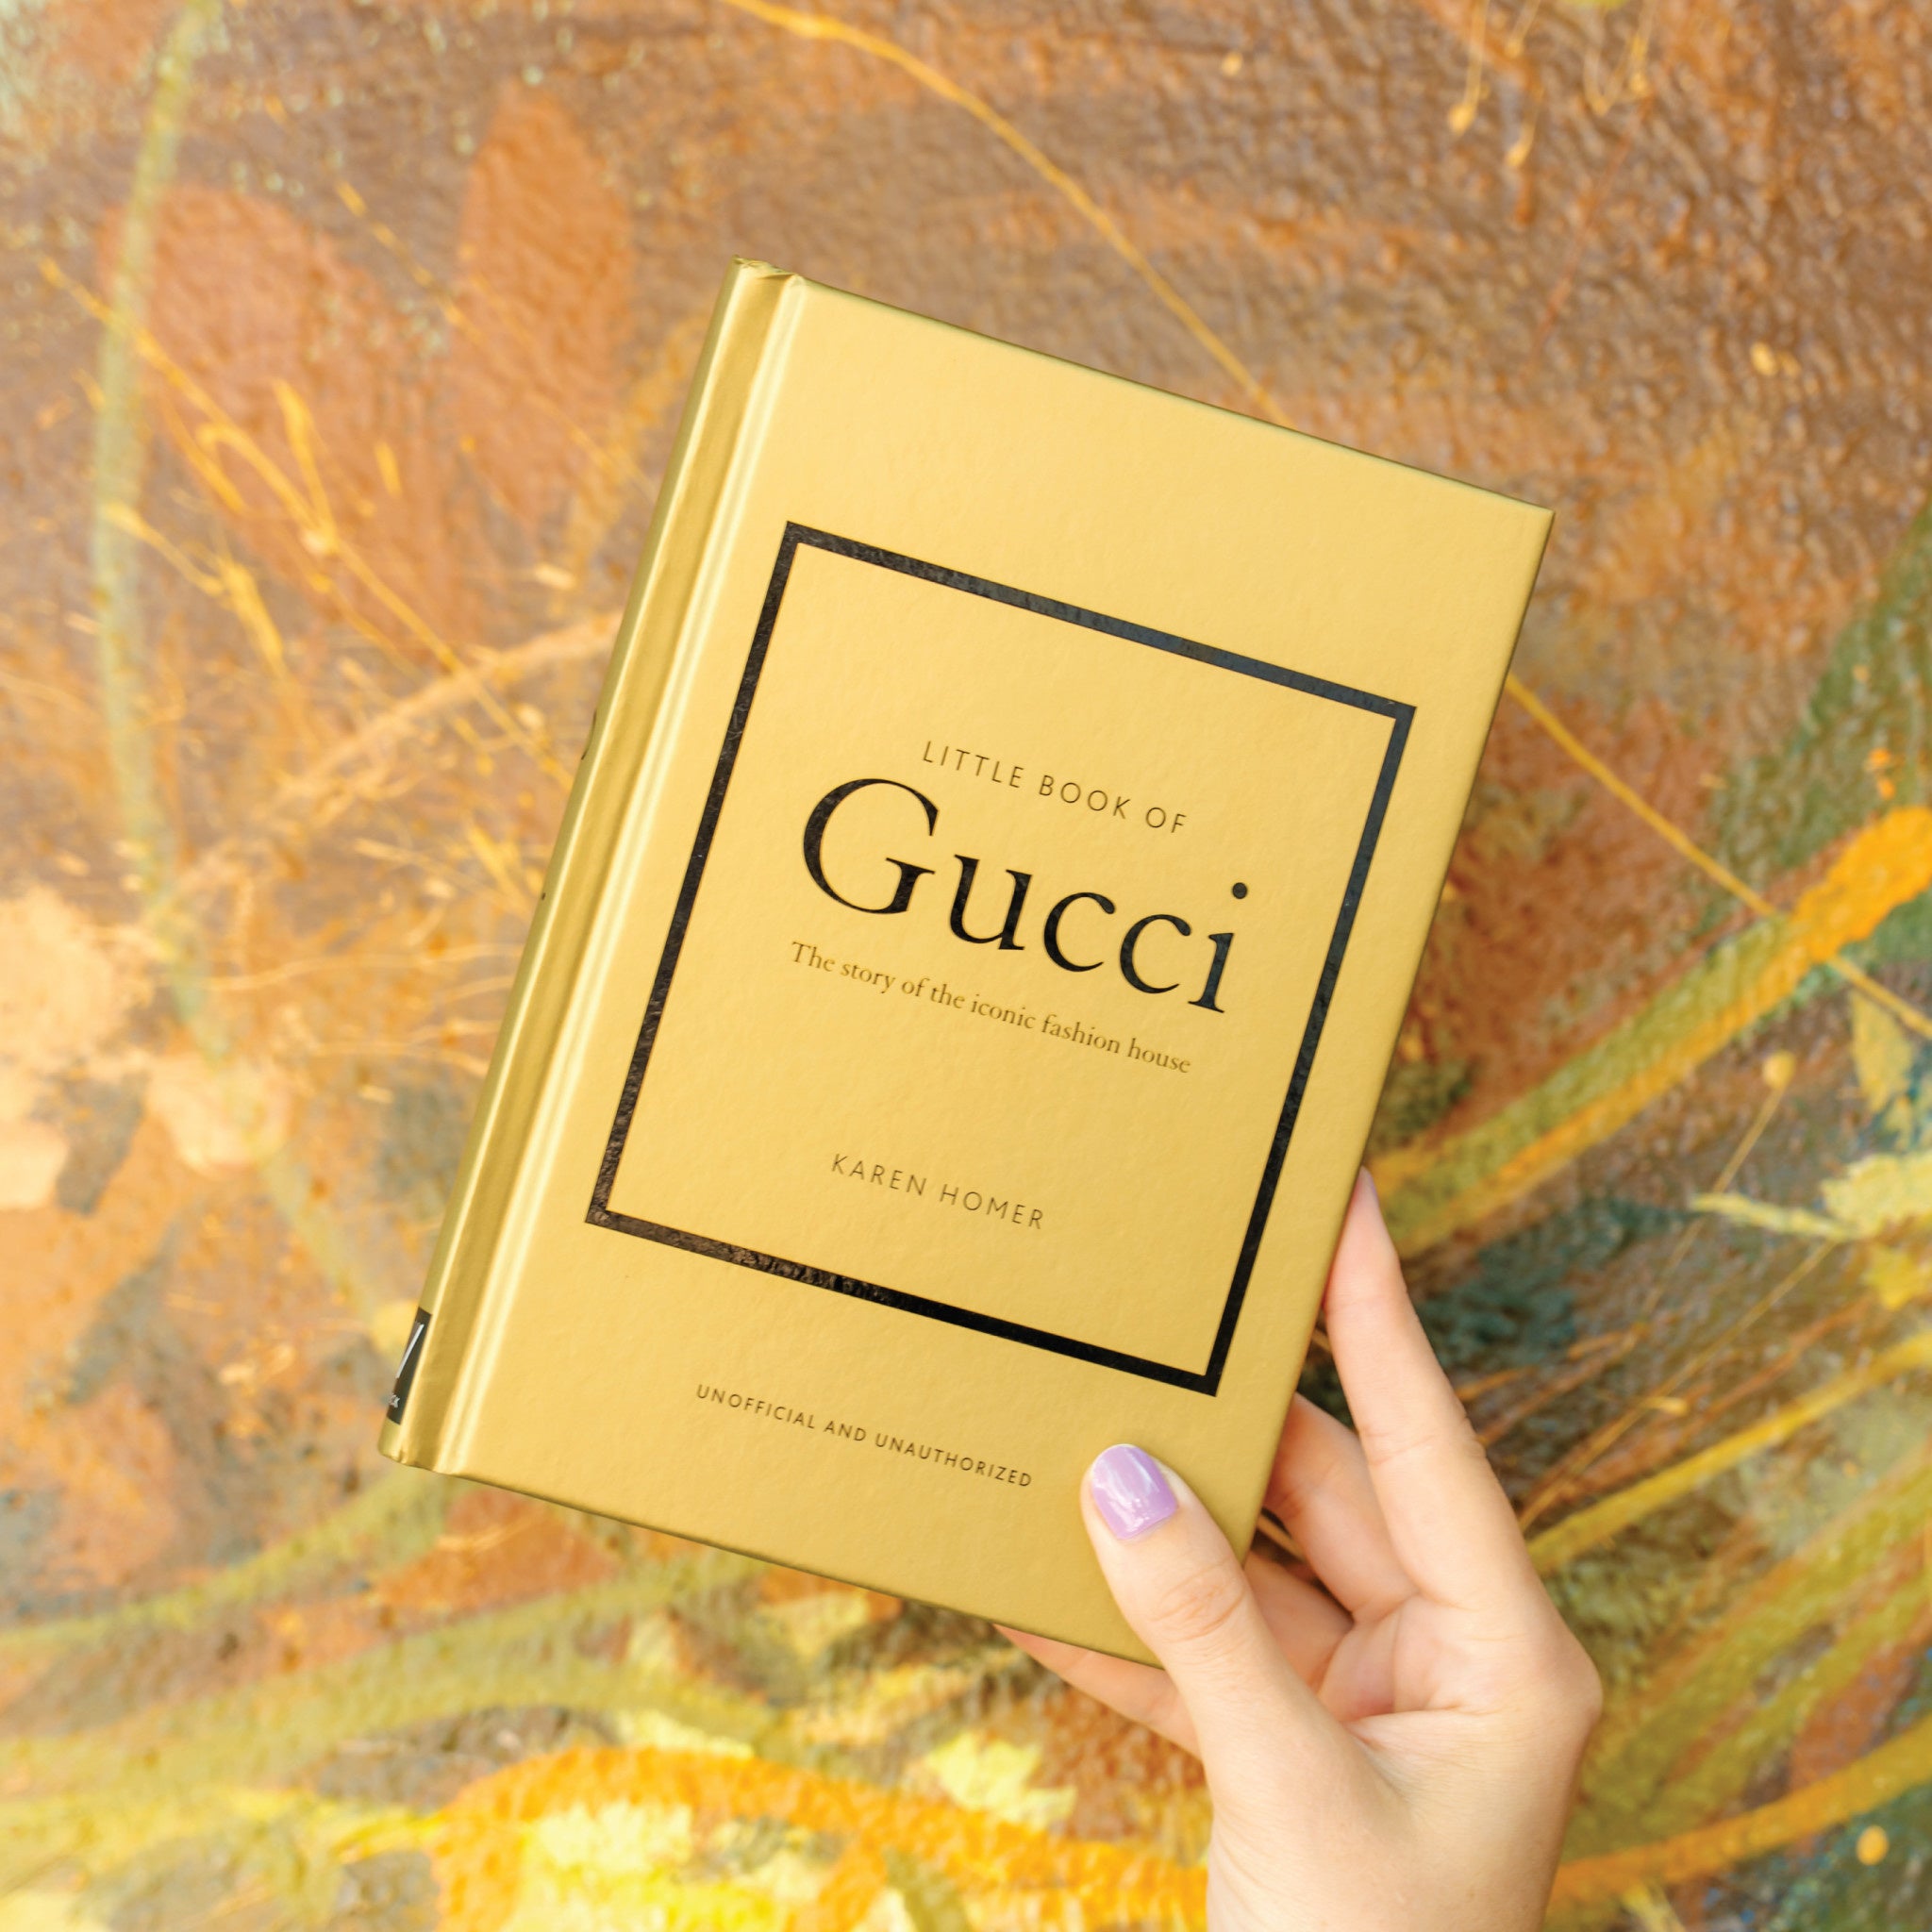 Little Book of Gucci: The Story of the Iconic Fashion House - Wynwood Walls Shop